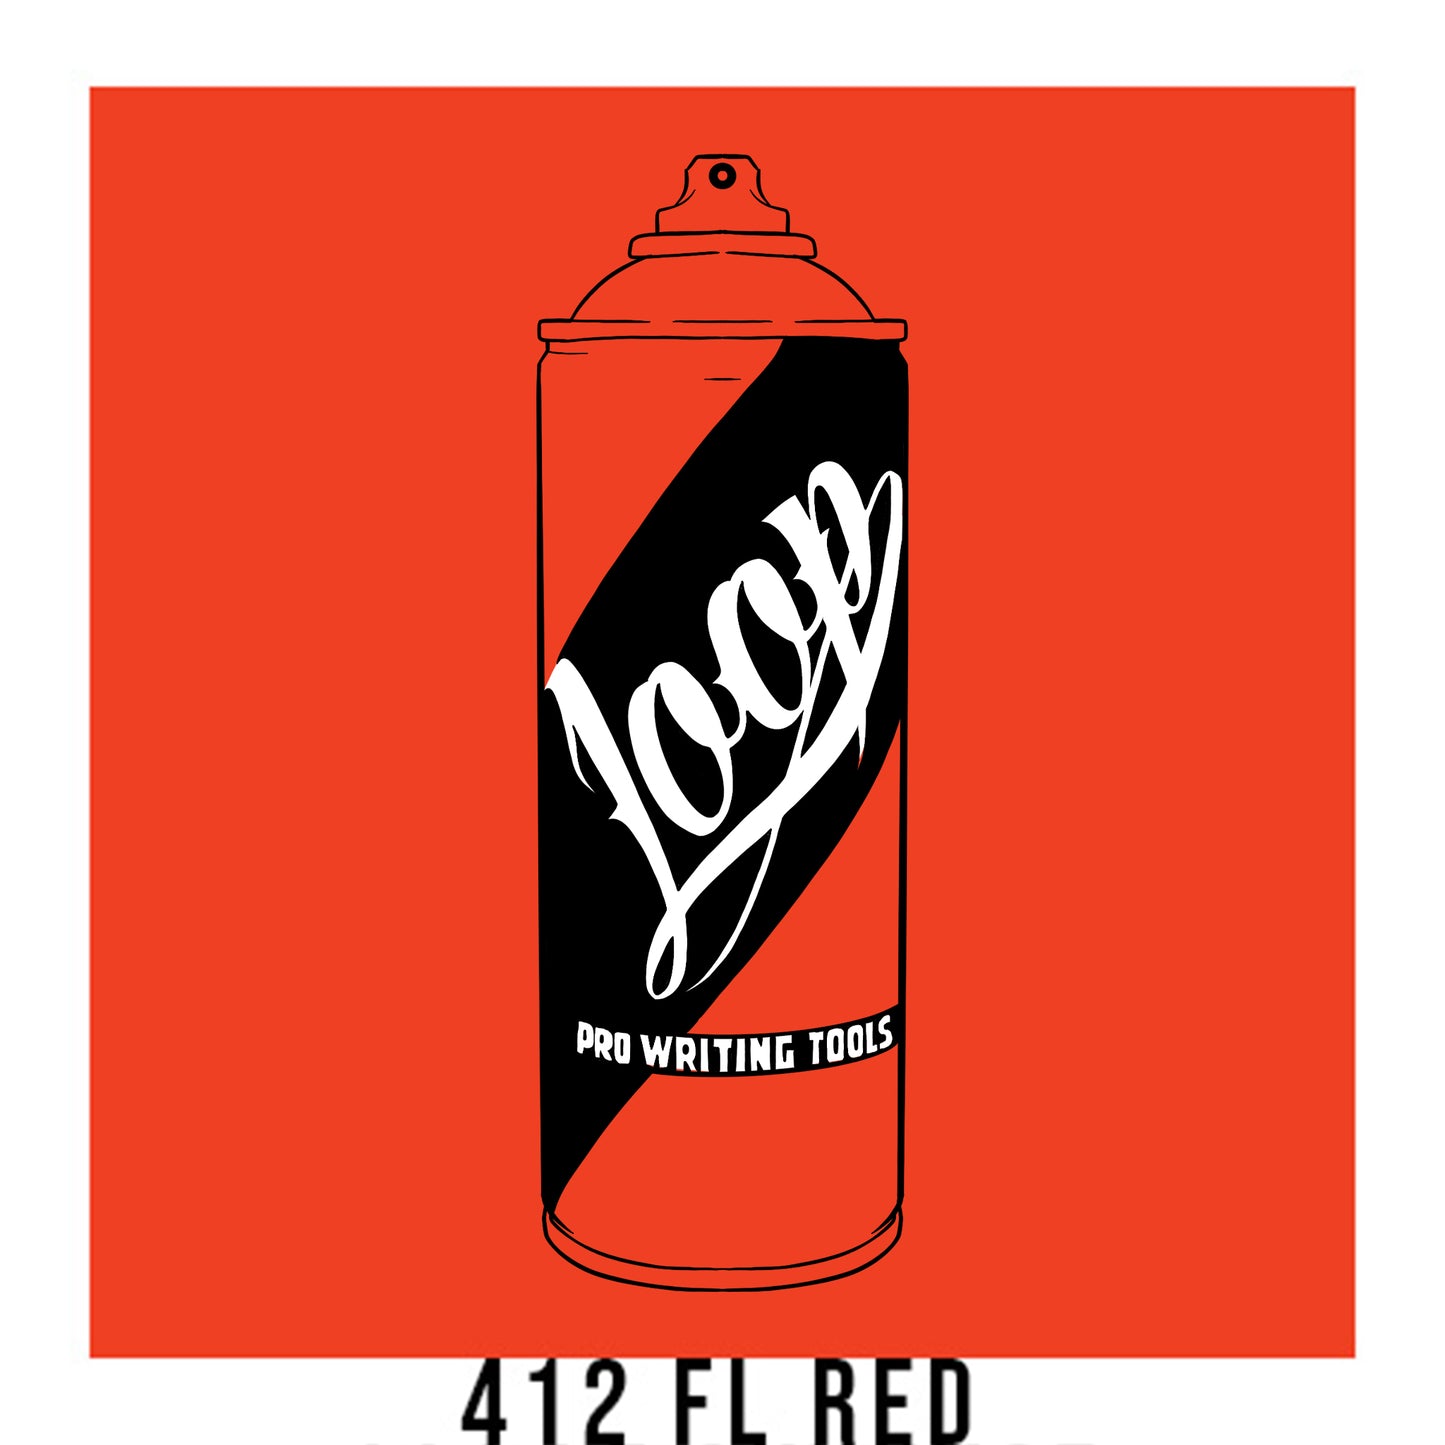 A black outline drawing of a neon red spray paint can with the word "Loop" written on the face in script. The background is a color swatch of the same neon red with a white border with the words "412 FL Red" at the bottom.